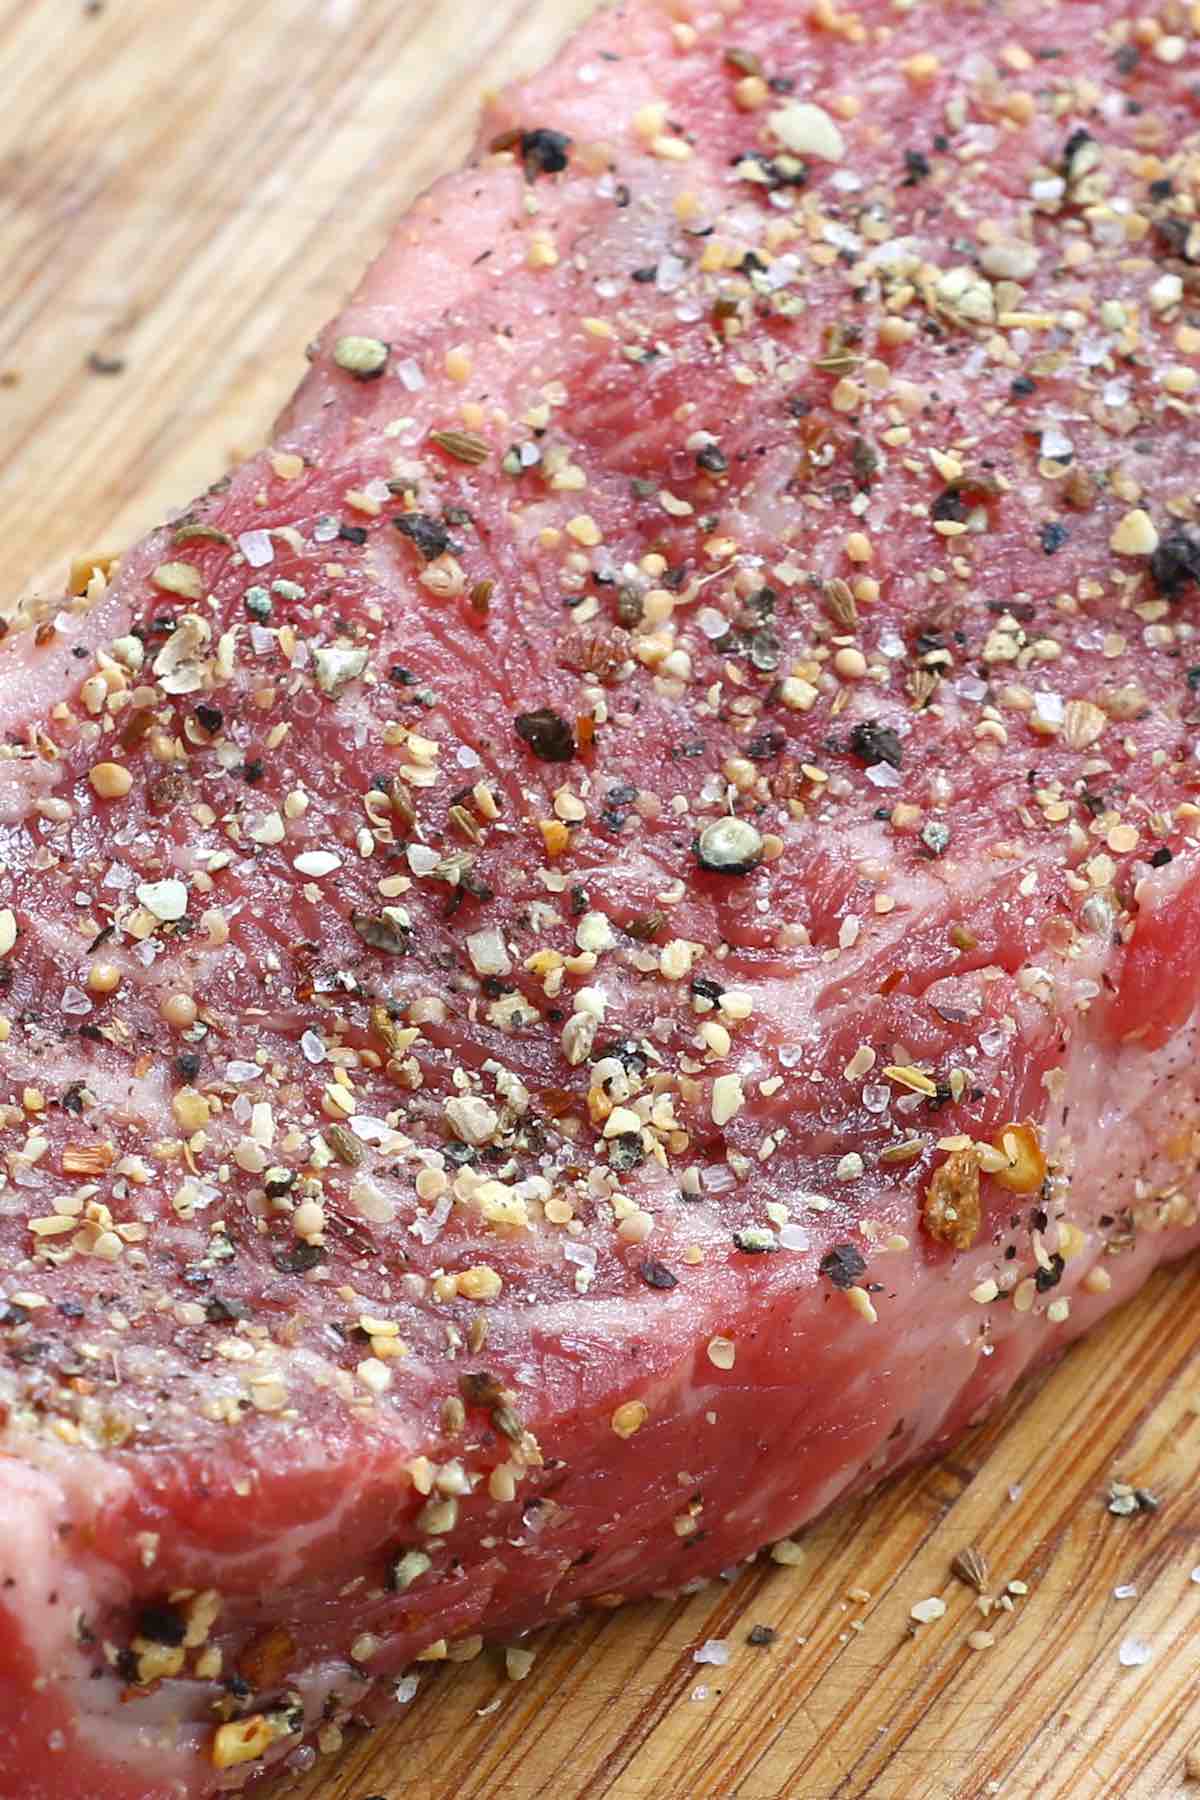 A striploin steak that has been rubbed with Montreal seasoning and is ready for cooking